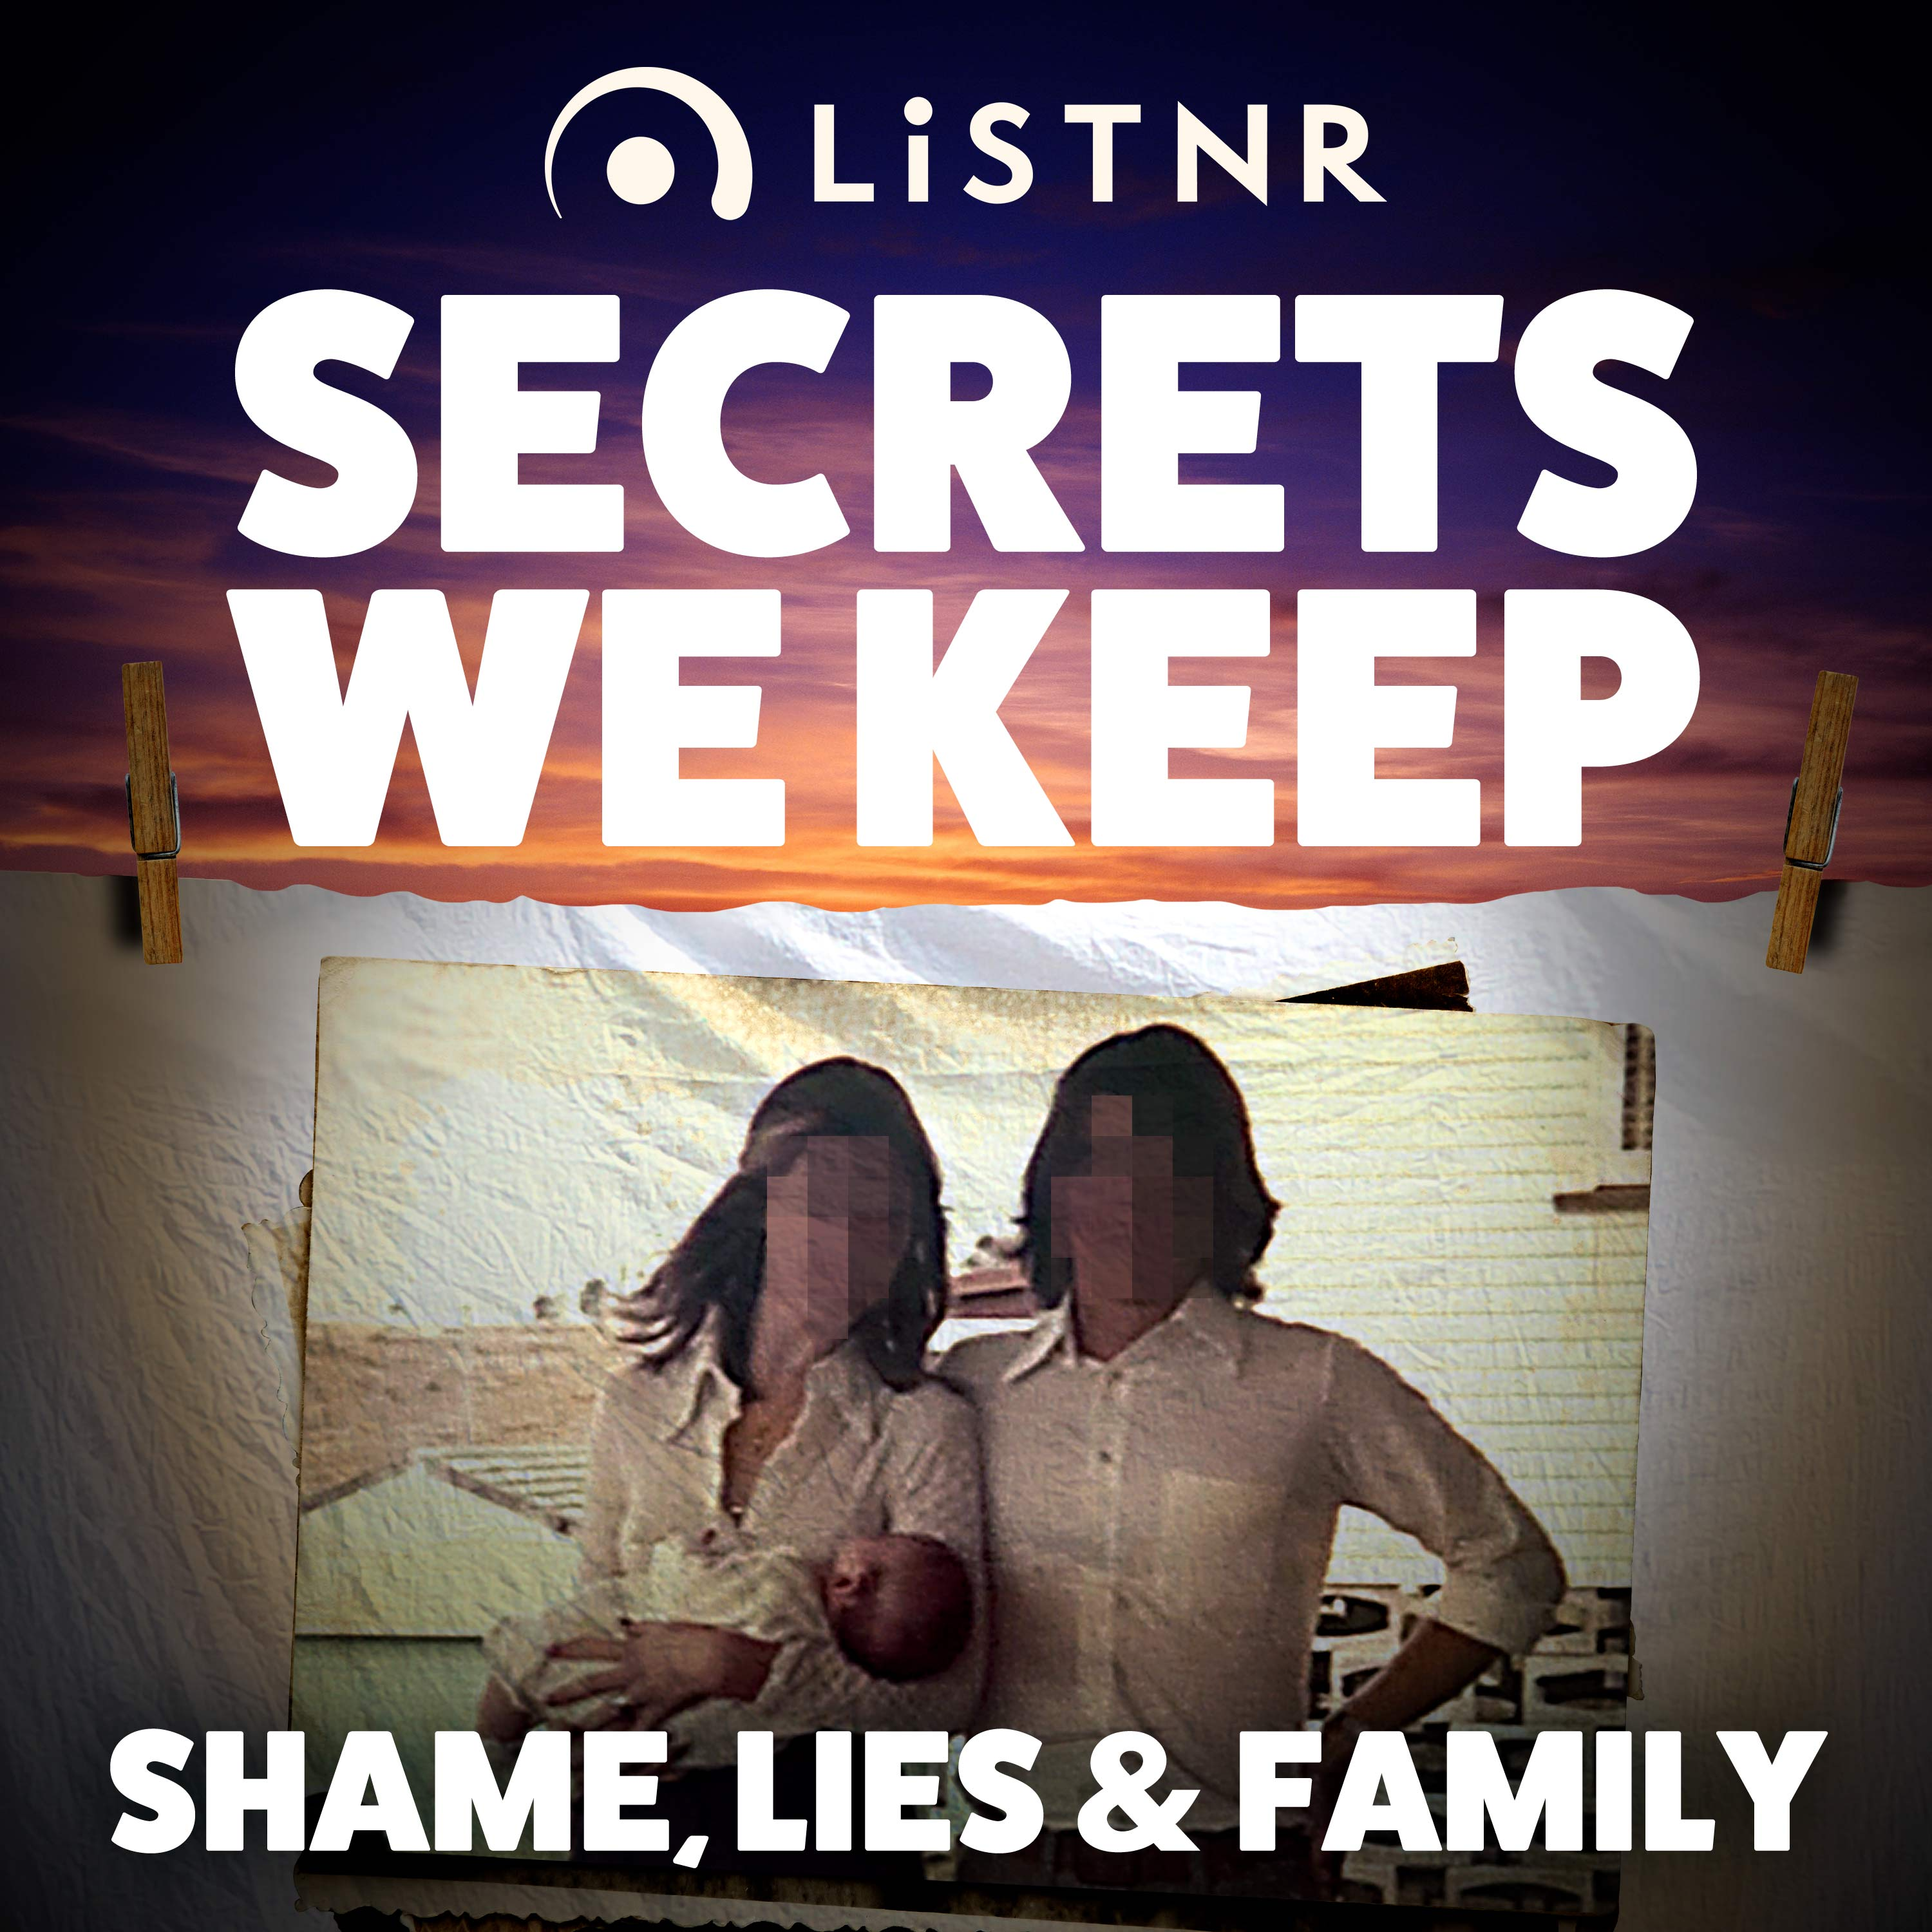 Shame, Lies & Family - Finding Michael